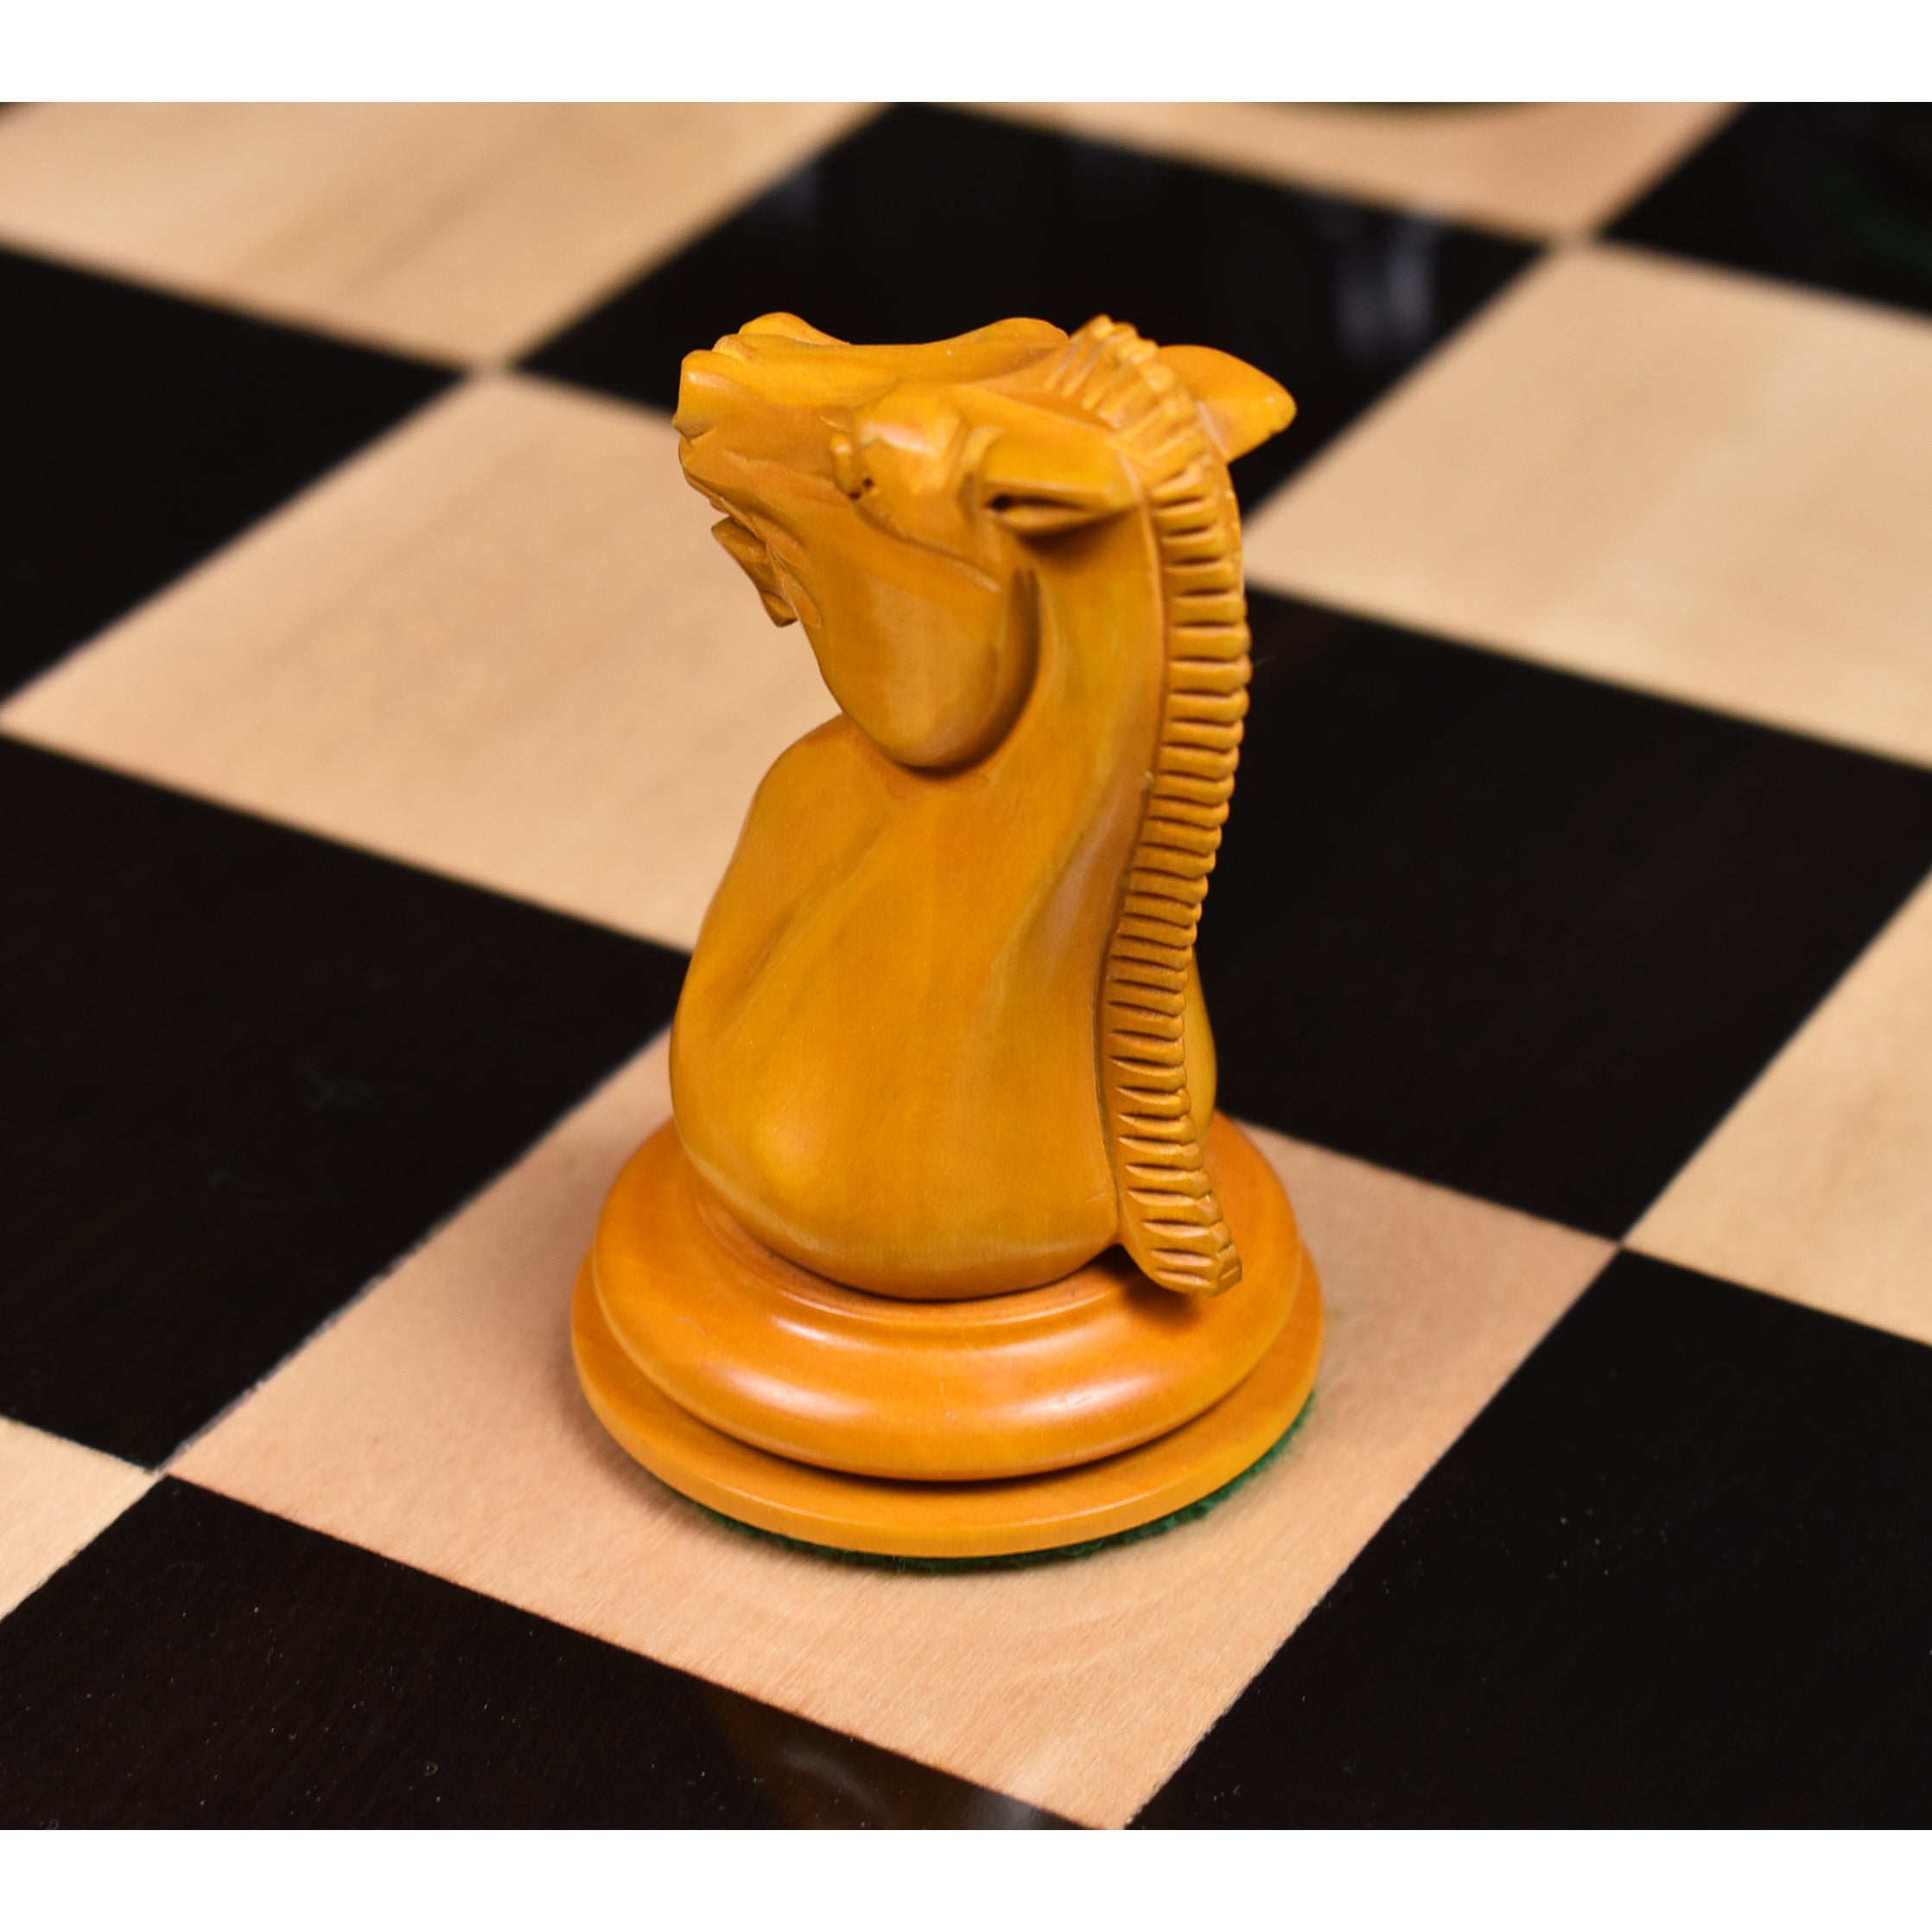 Combo of Knight & Pawns Chess Pieces in Box Wood - 4.52 Knight.